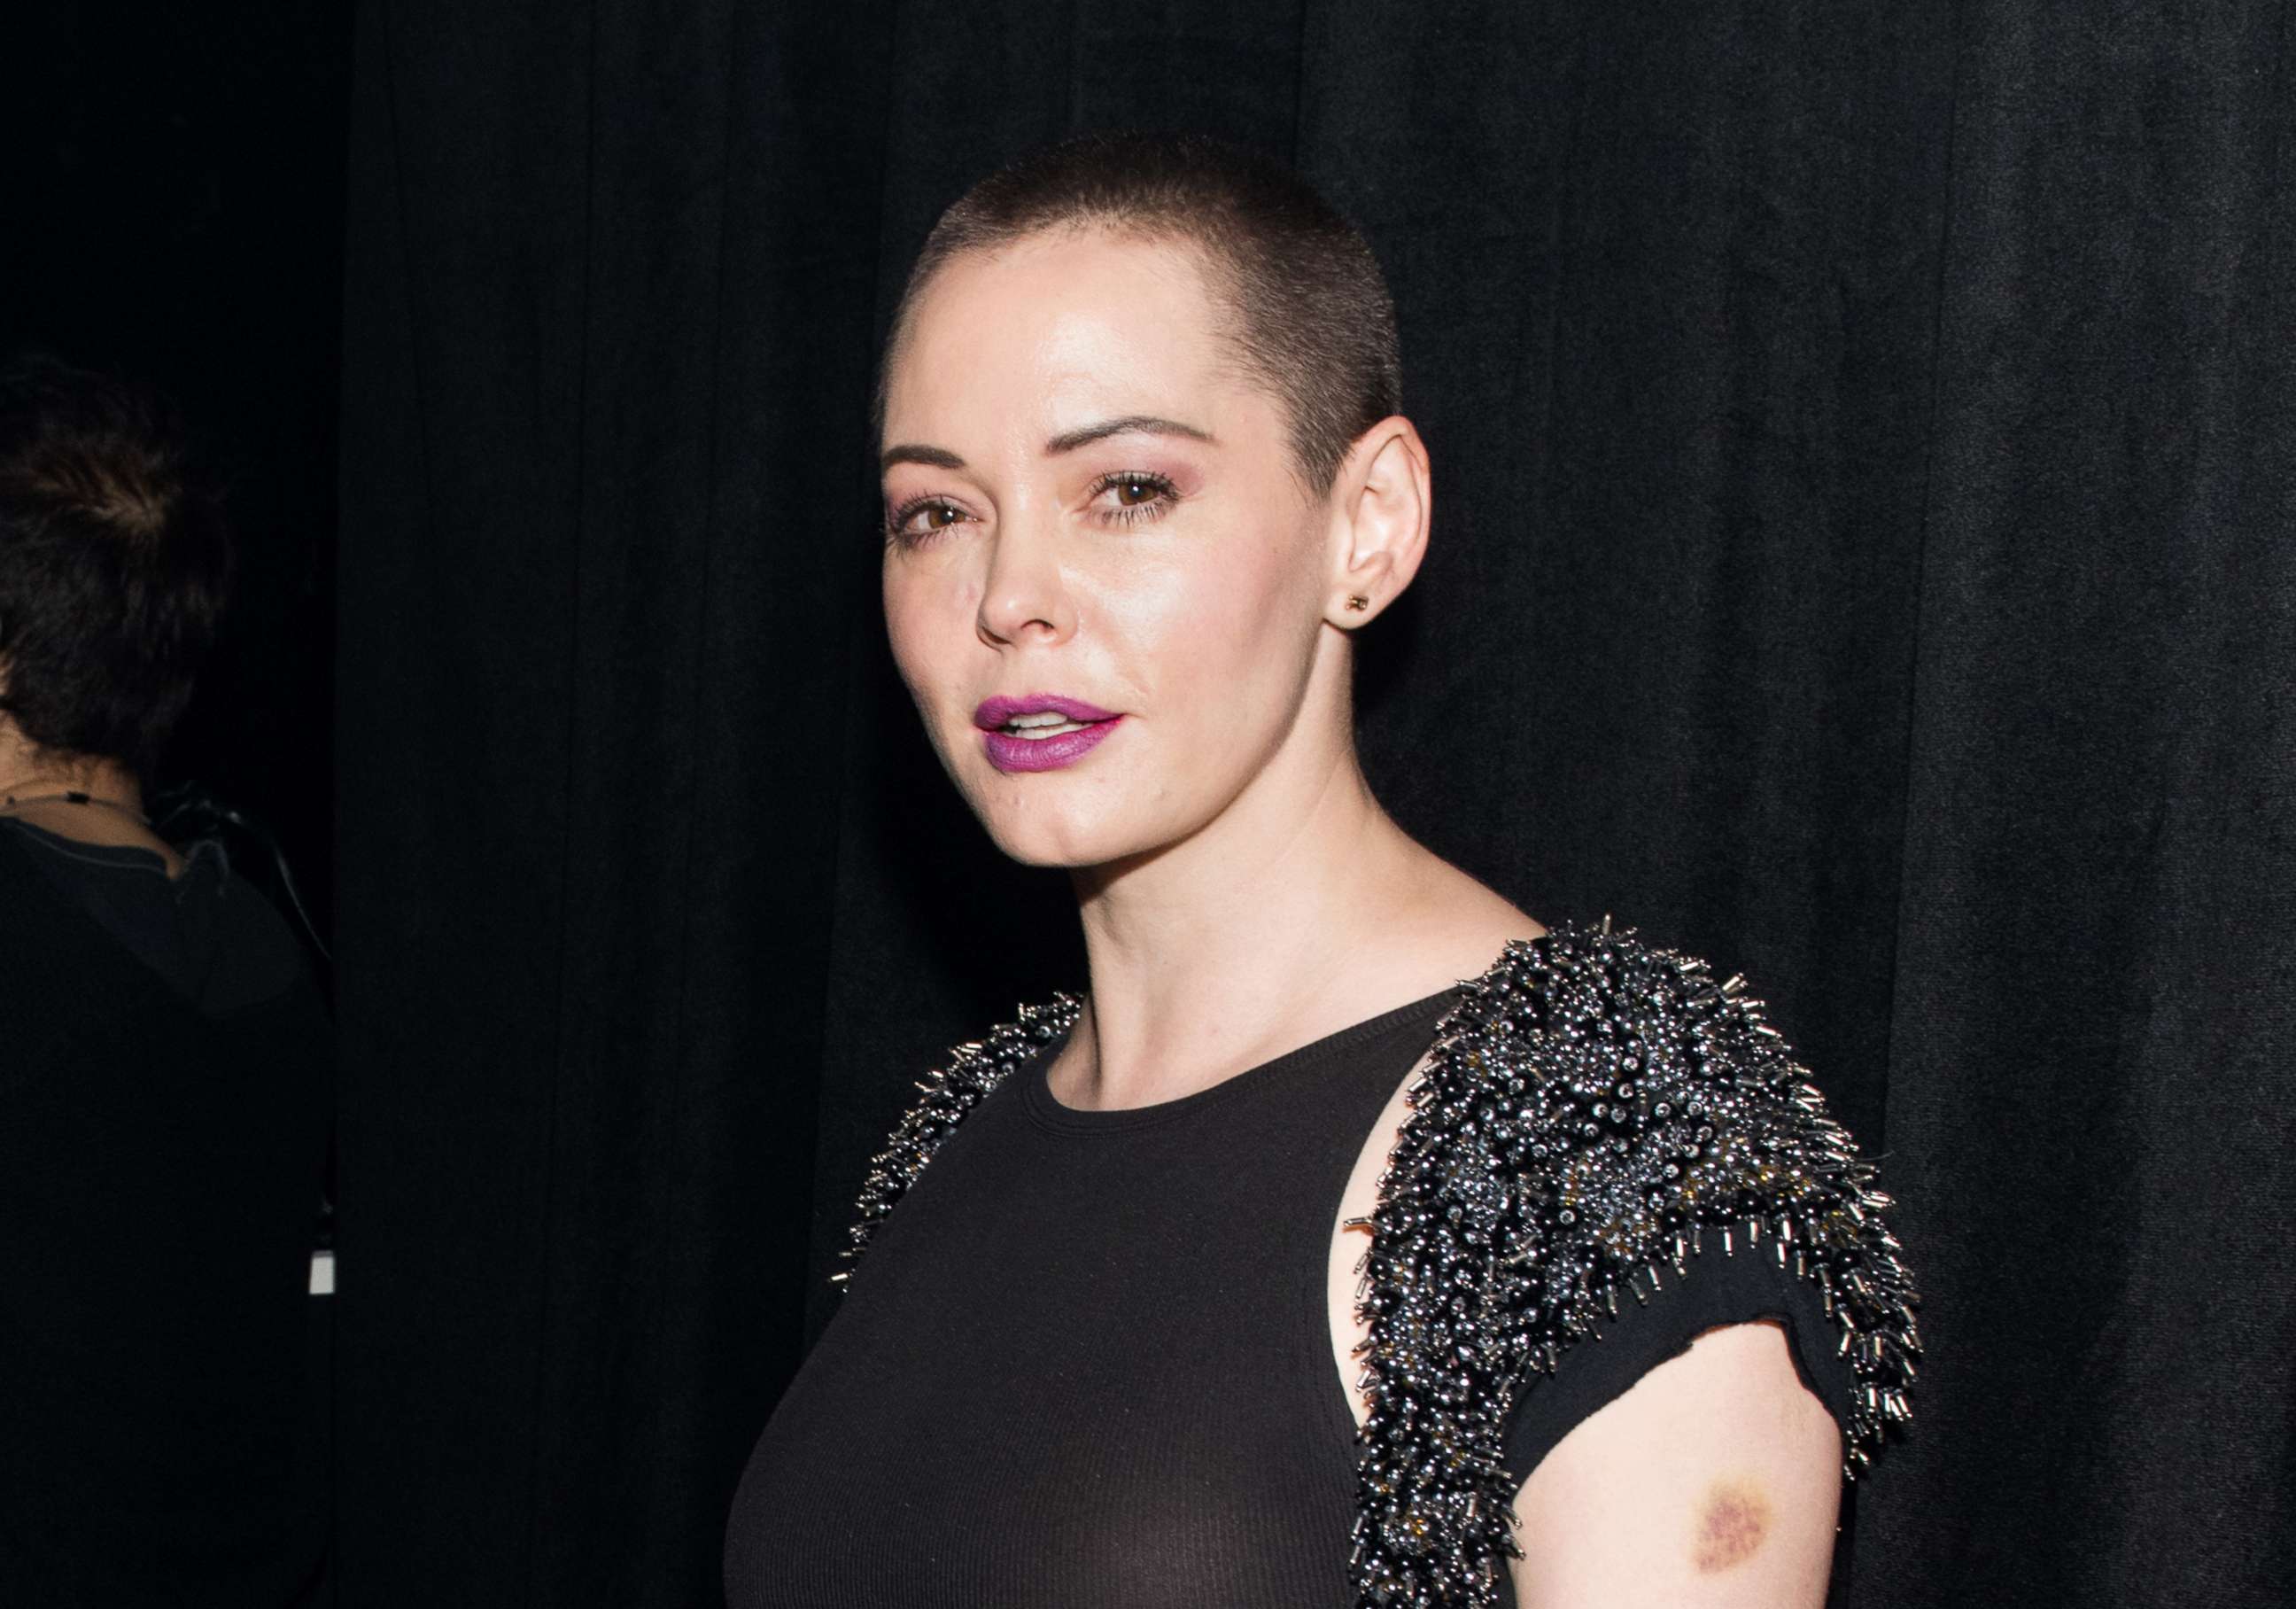 PHOTO: Actress Rose McGowan attends an opening, Nov. 28, 2016 in New York City. 